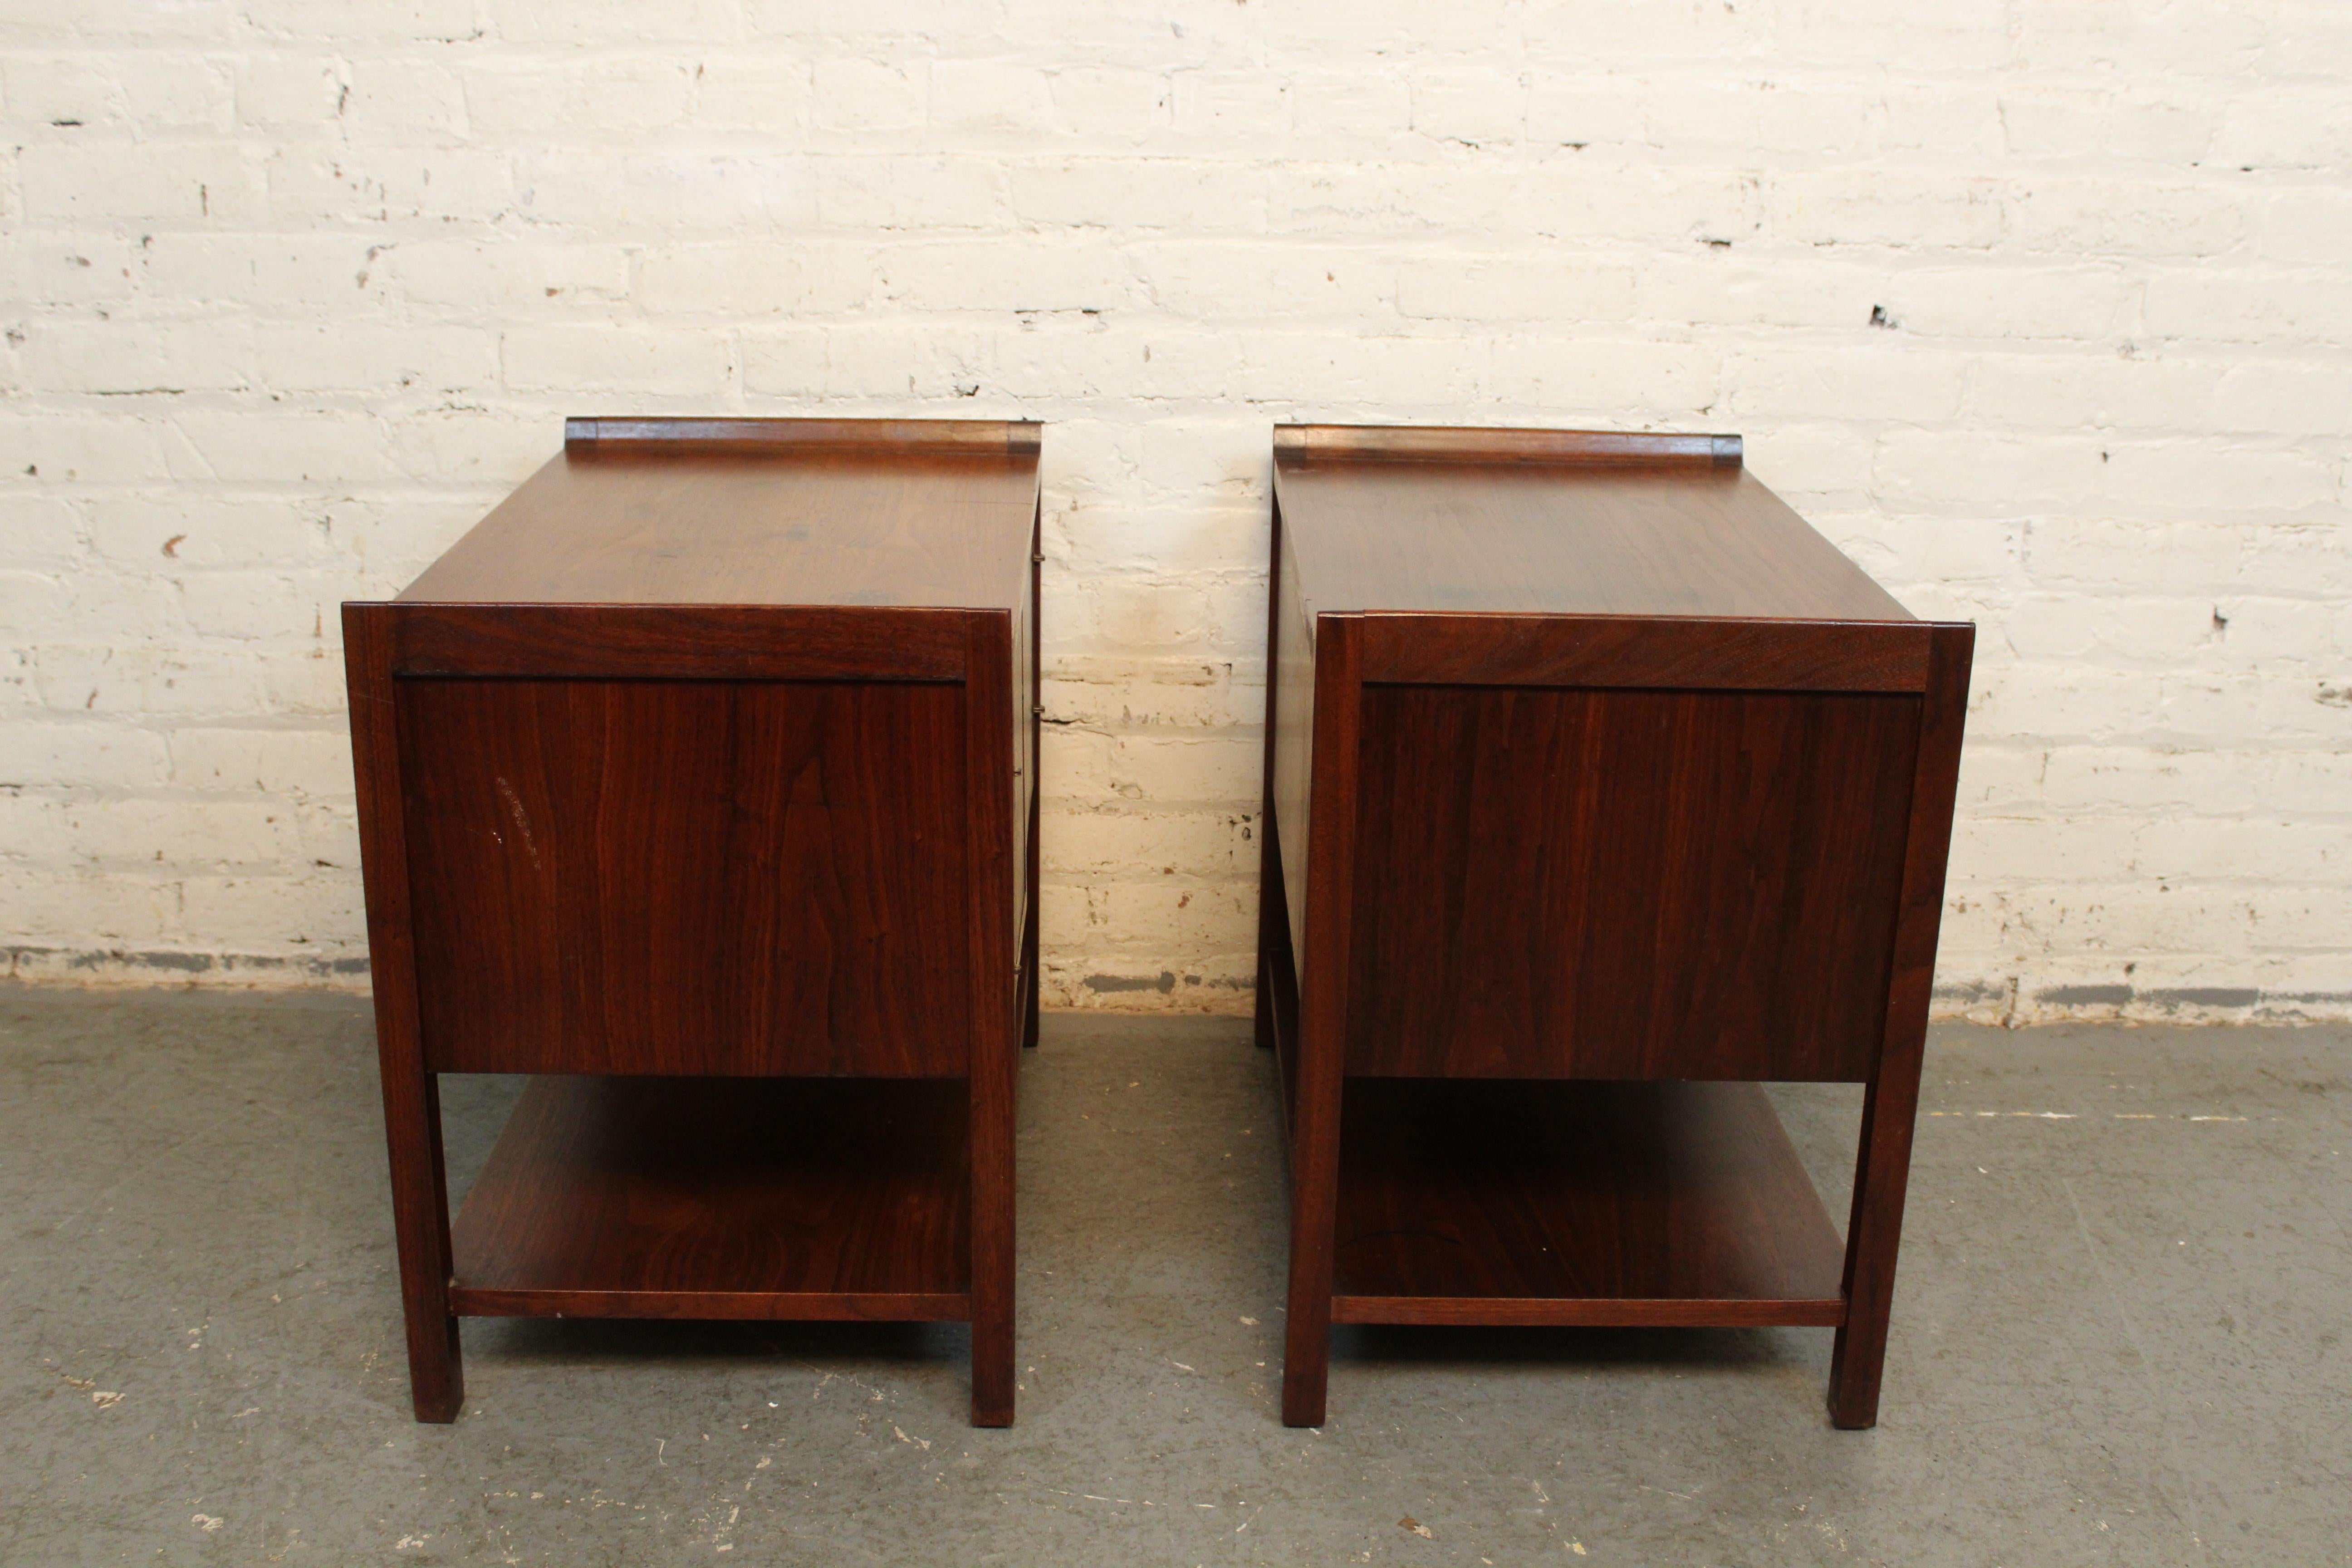 Vintage American Walnut + Leather Nightstands by Dillingham In Good Condition For Sale In Brooklyn, NY